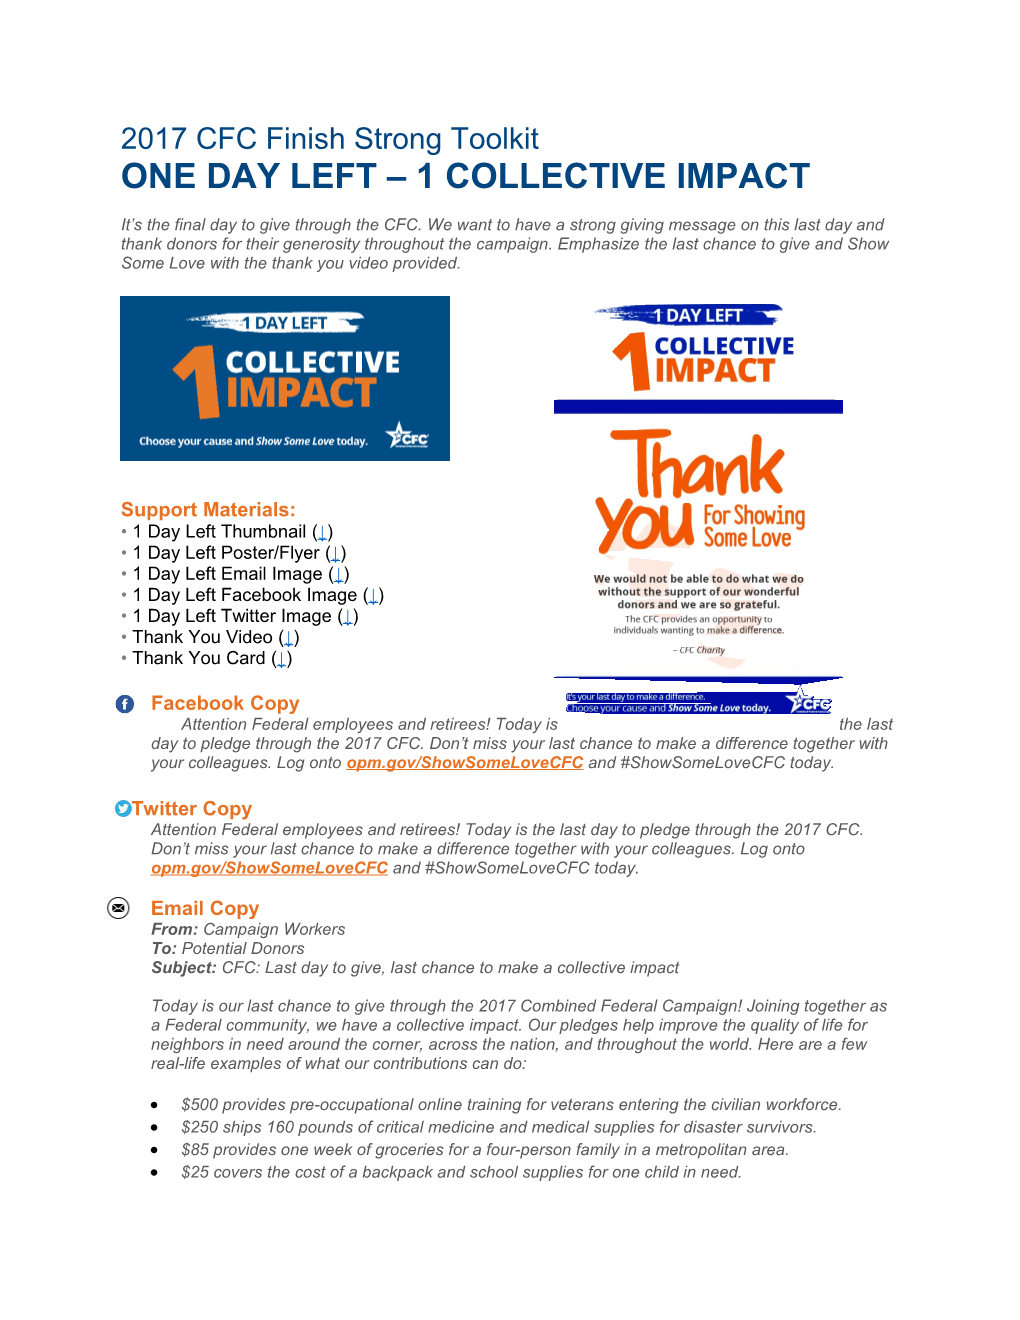 One Day Left 1 Collective Impact